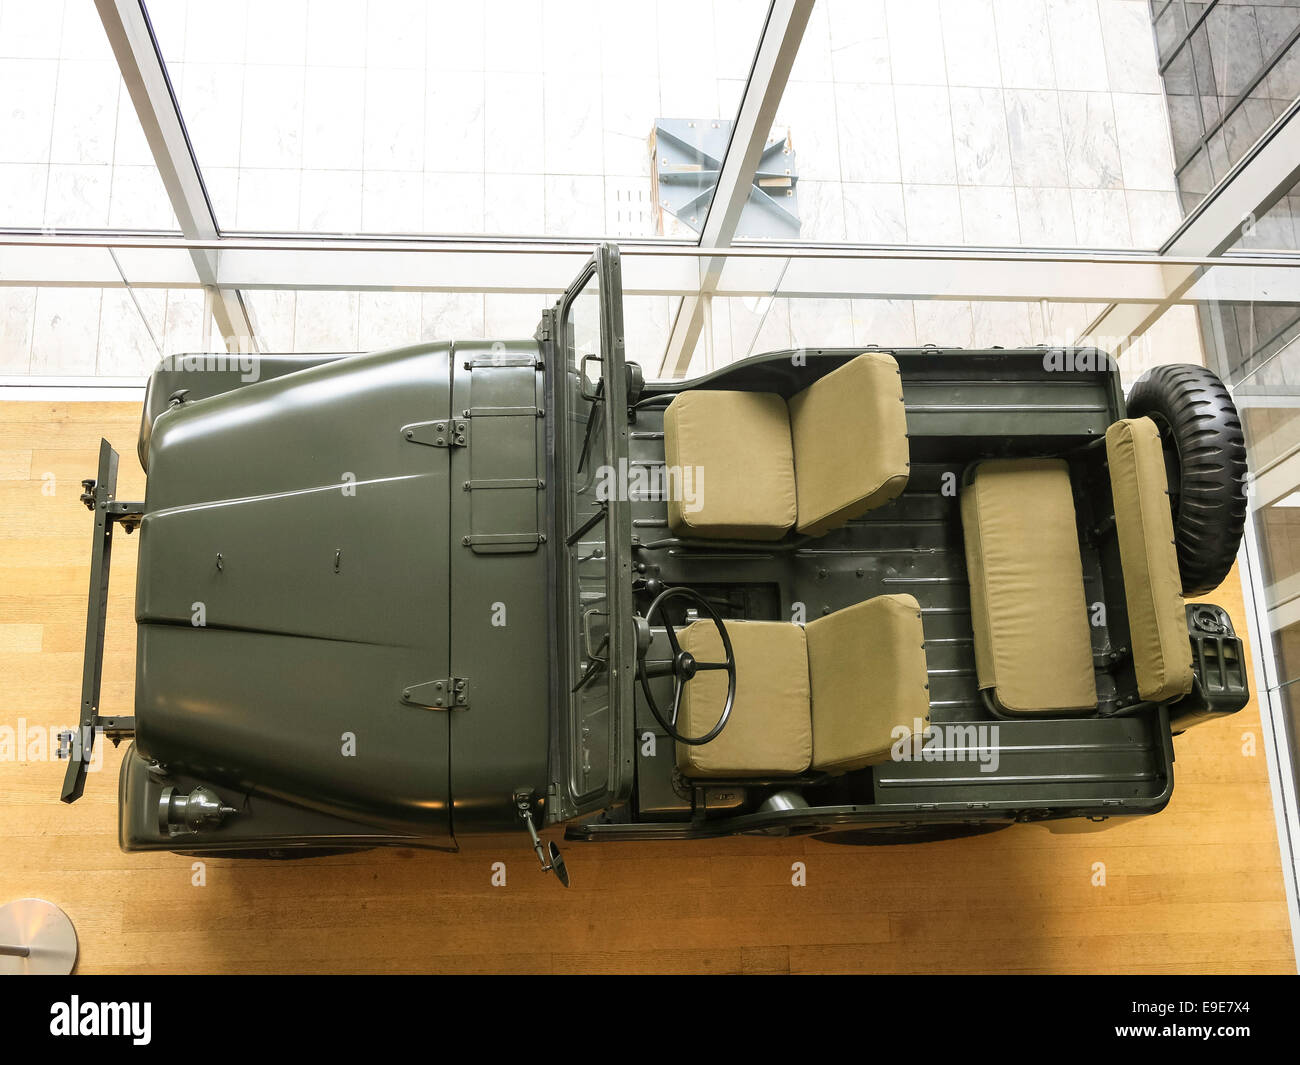 Vintage U.S. Army Jeep, Museum of Modern Art, NYC Stock Photo